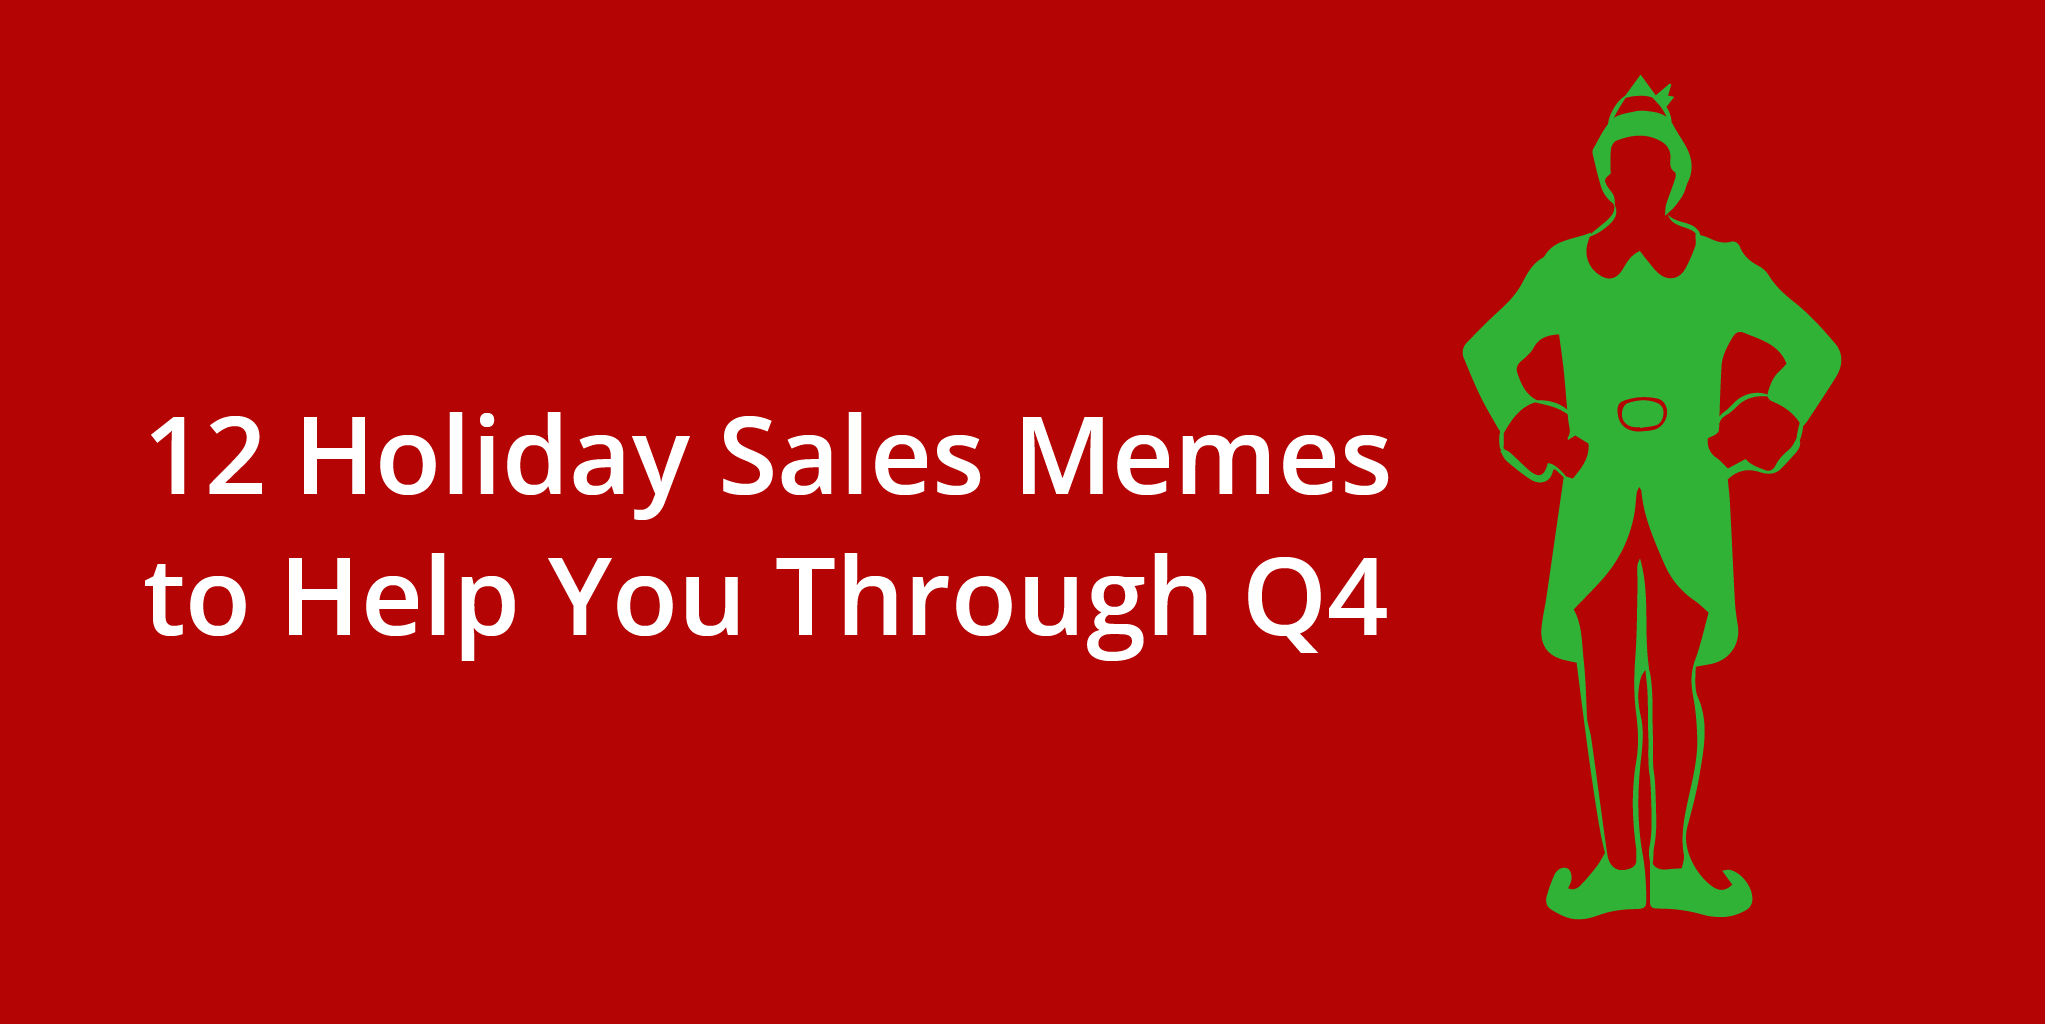 12 Holiday Sales Memes to Help You Through Q4 | Telephones for business